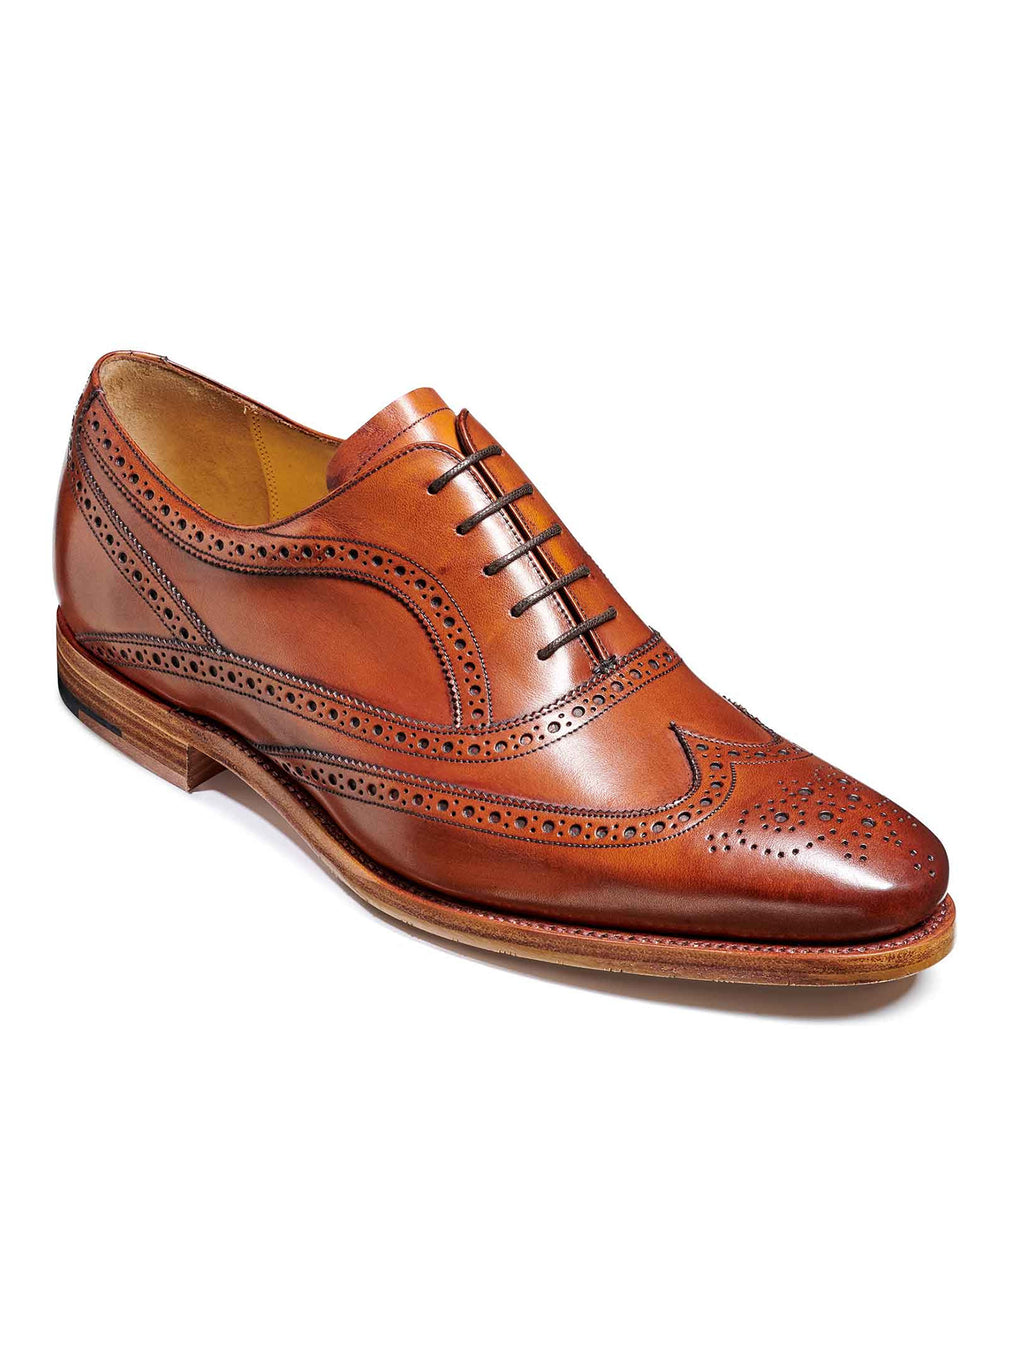 barker shoes turing rosewood